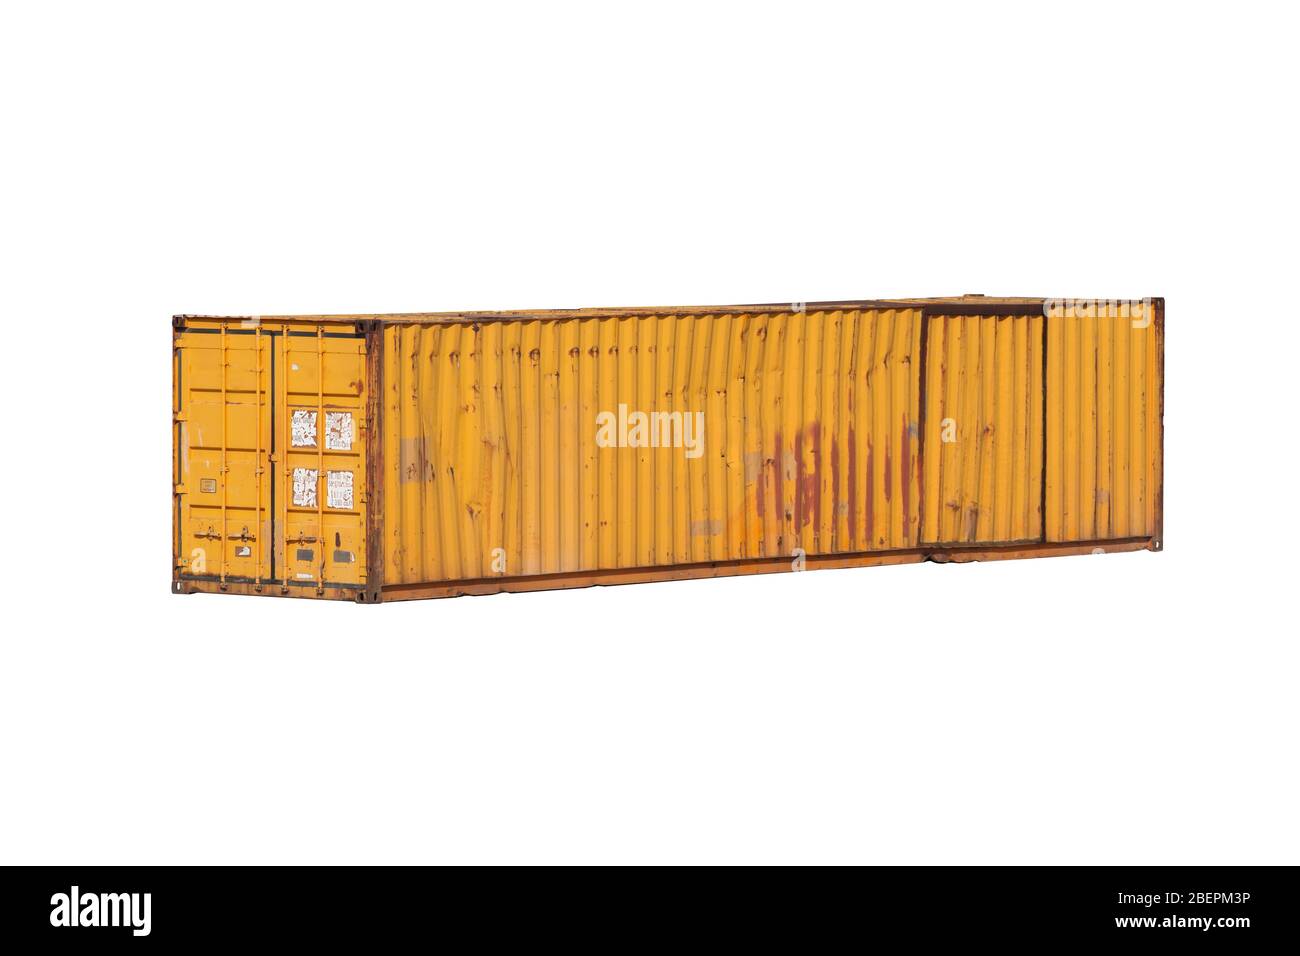 Grungy yellow old cargo container isolated on white background, industrial shipping equipment Stock Photo